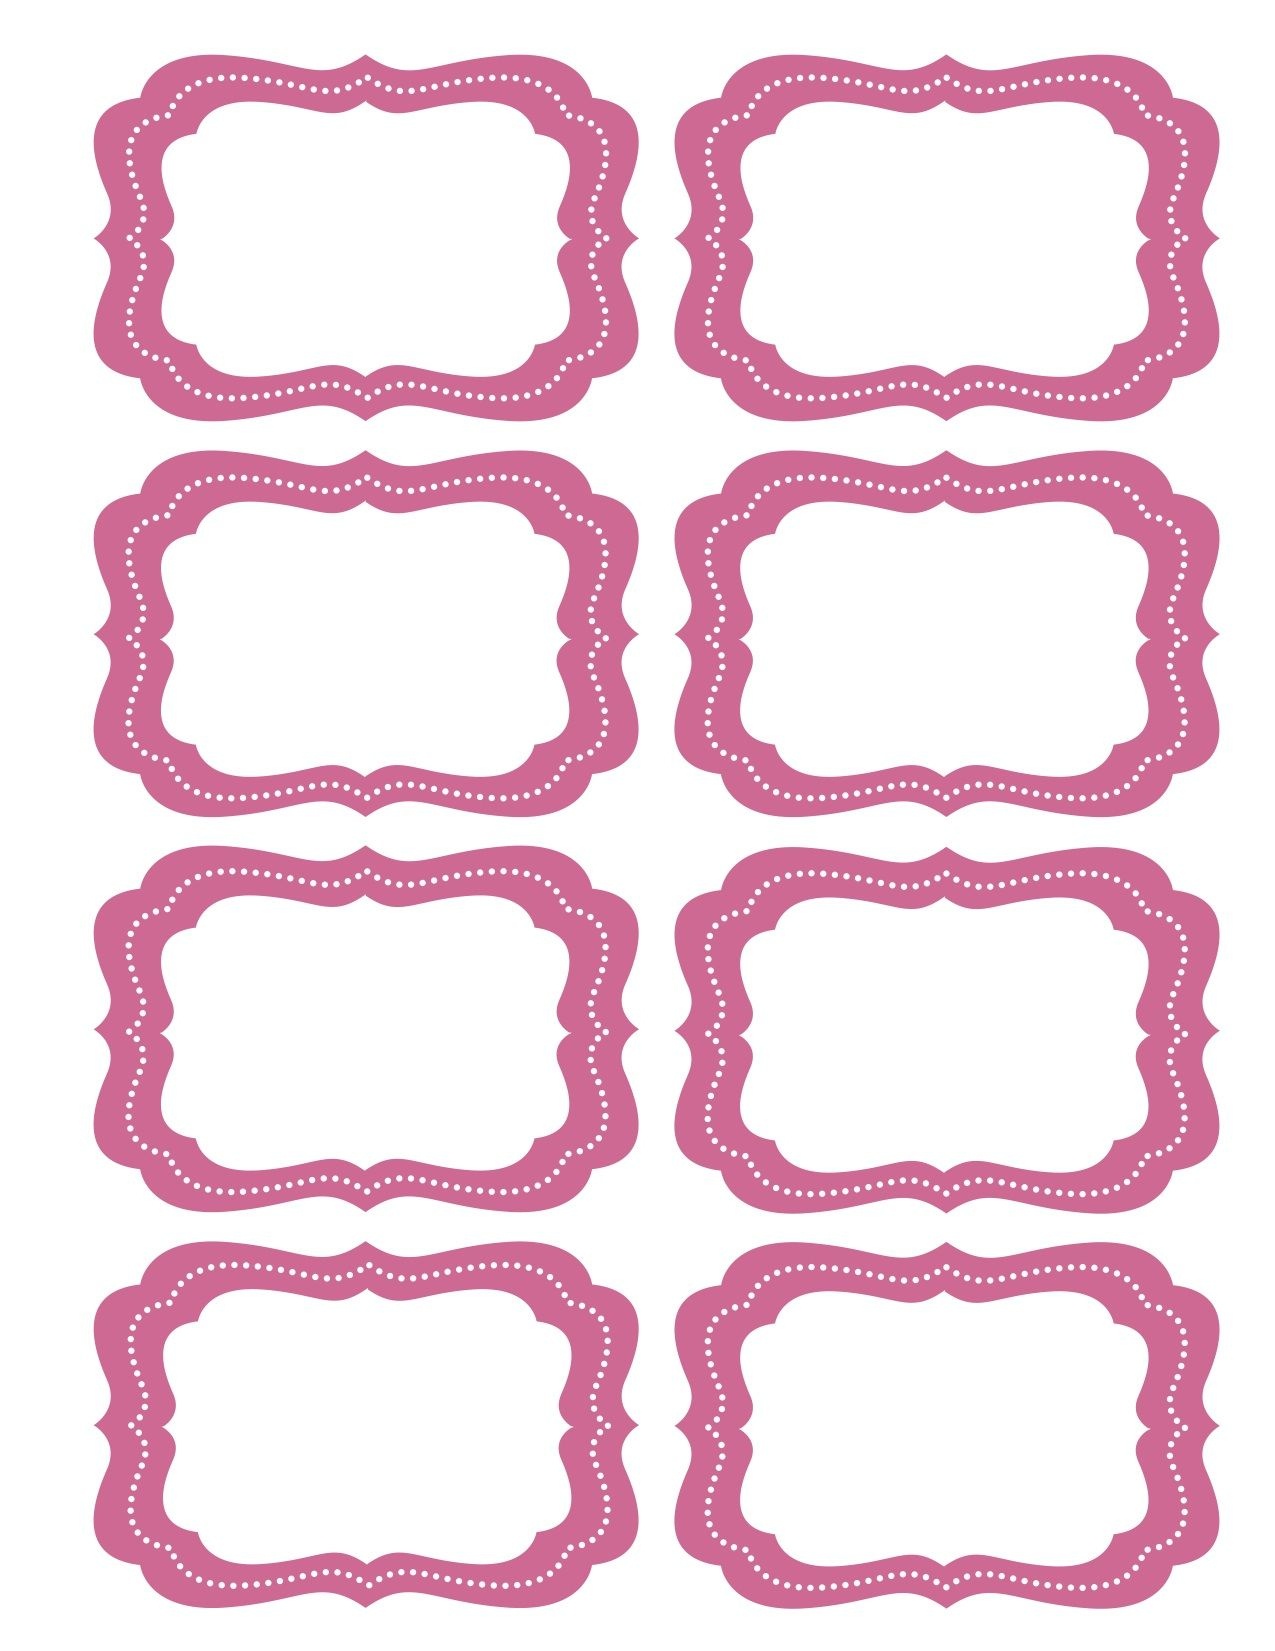 Free Printable Bag Label Templates | Candy Labels Blank Image - Free Printable Label Templates For Word